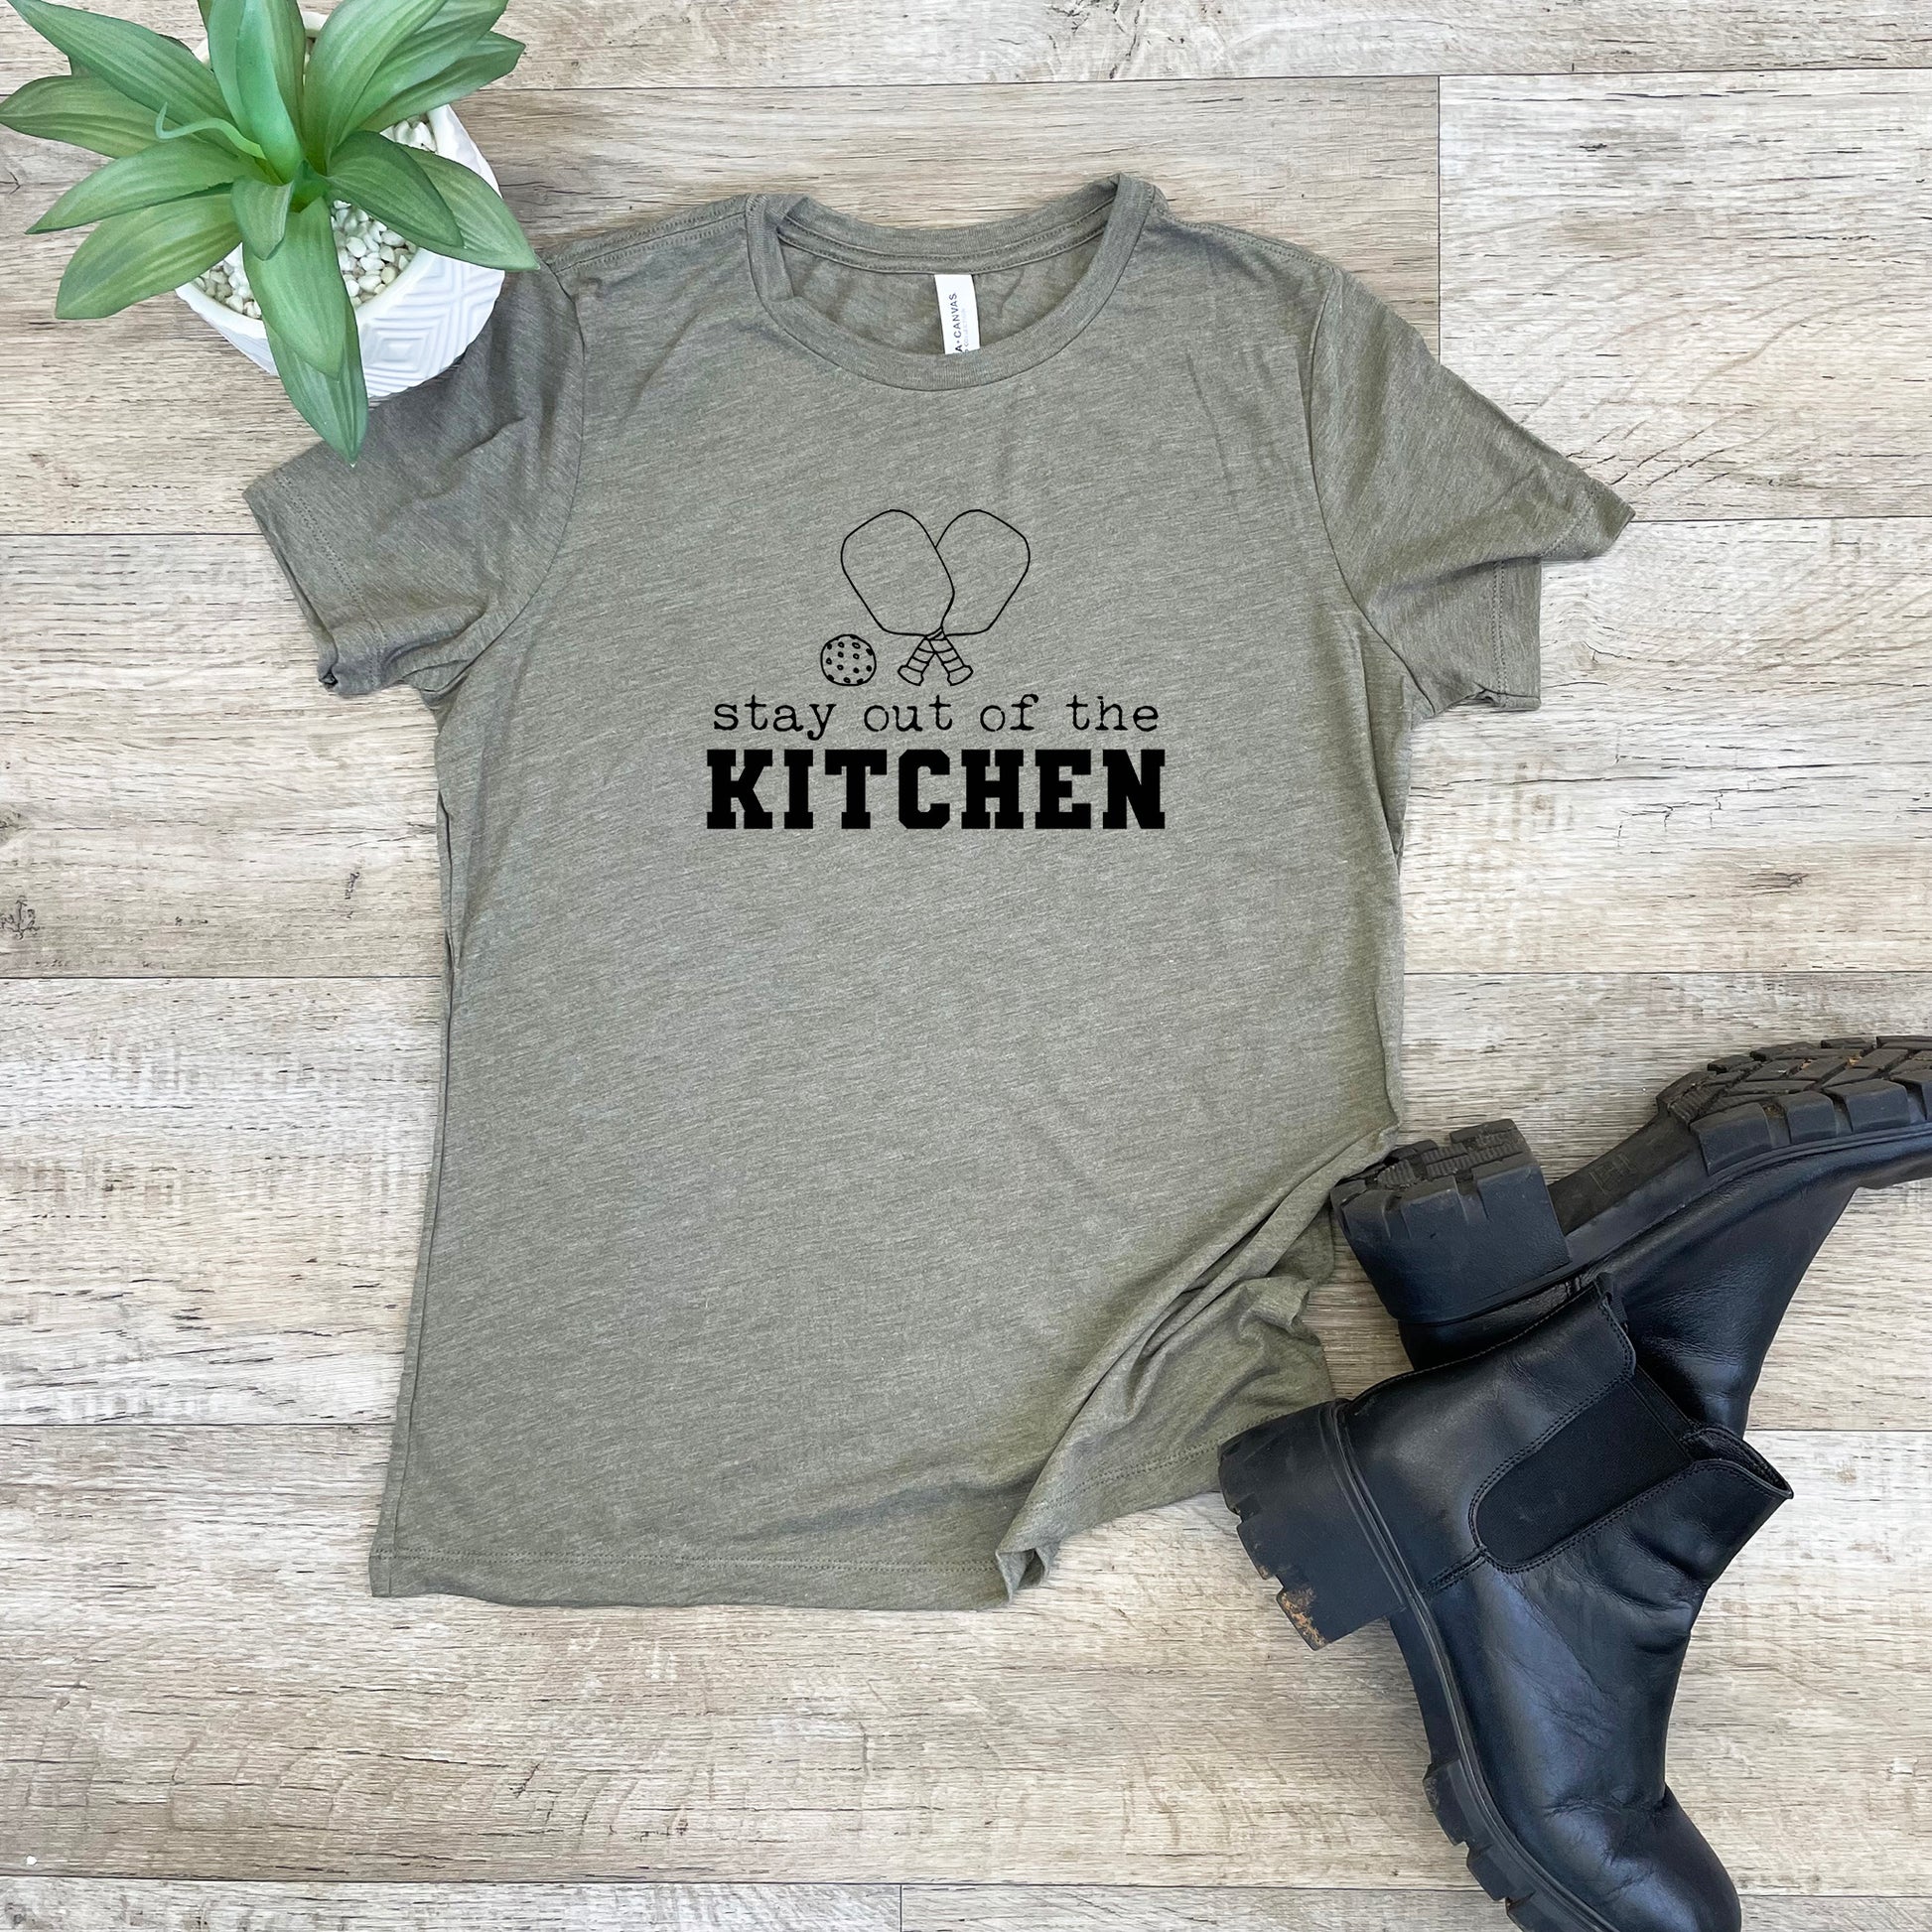 a shirt that says stay out of the kitchen